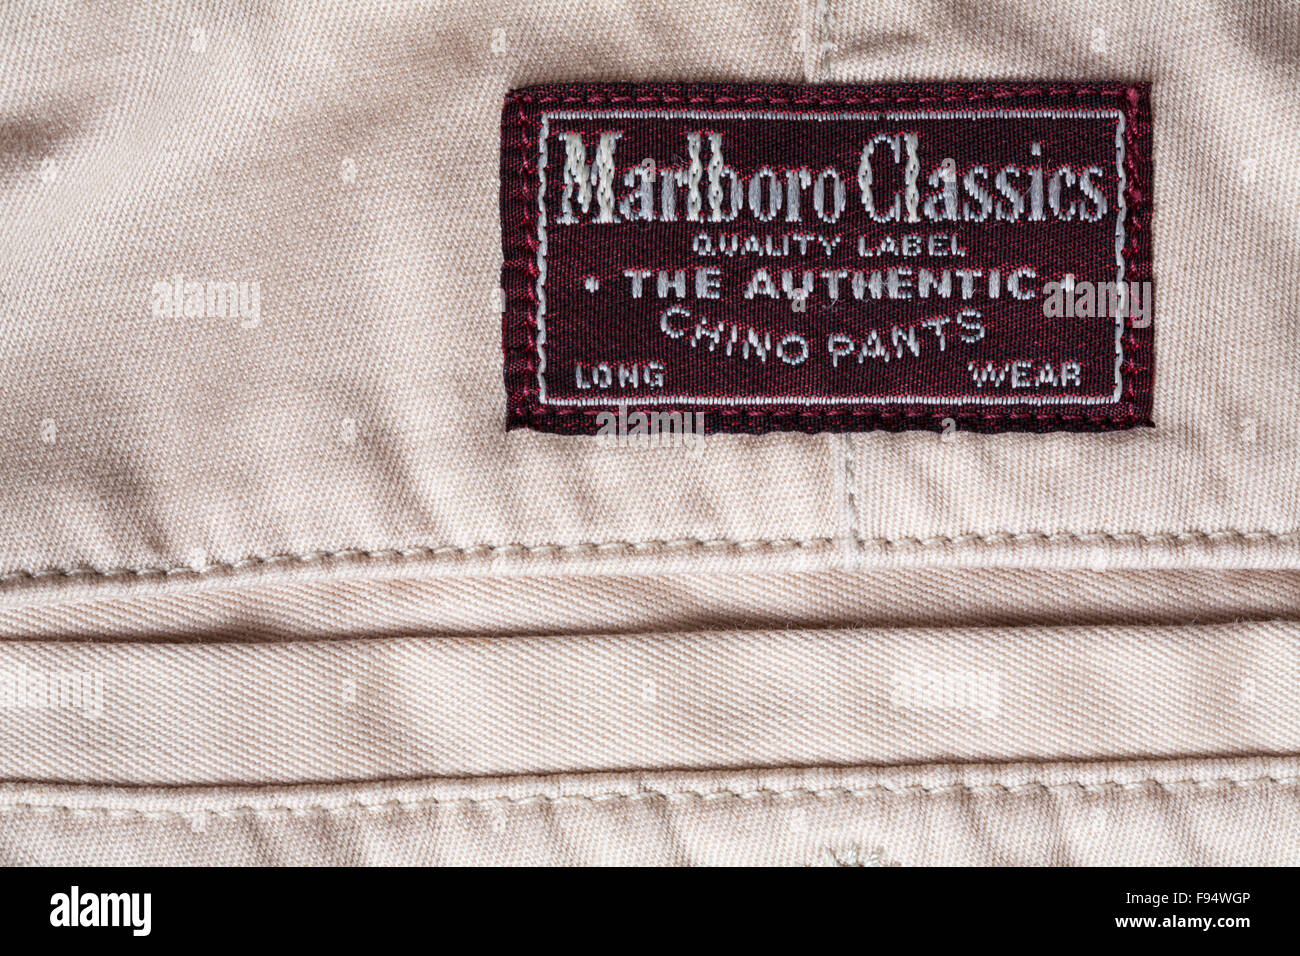 Marlboro Classics quality label The Authentic Chino Pants label on mans trousers Stock Photo